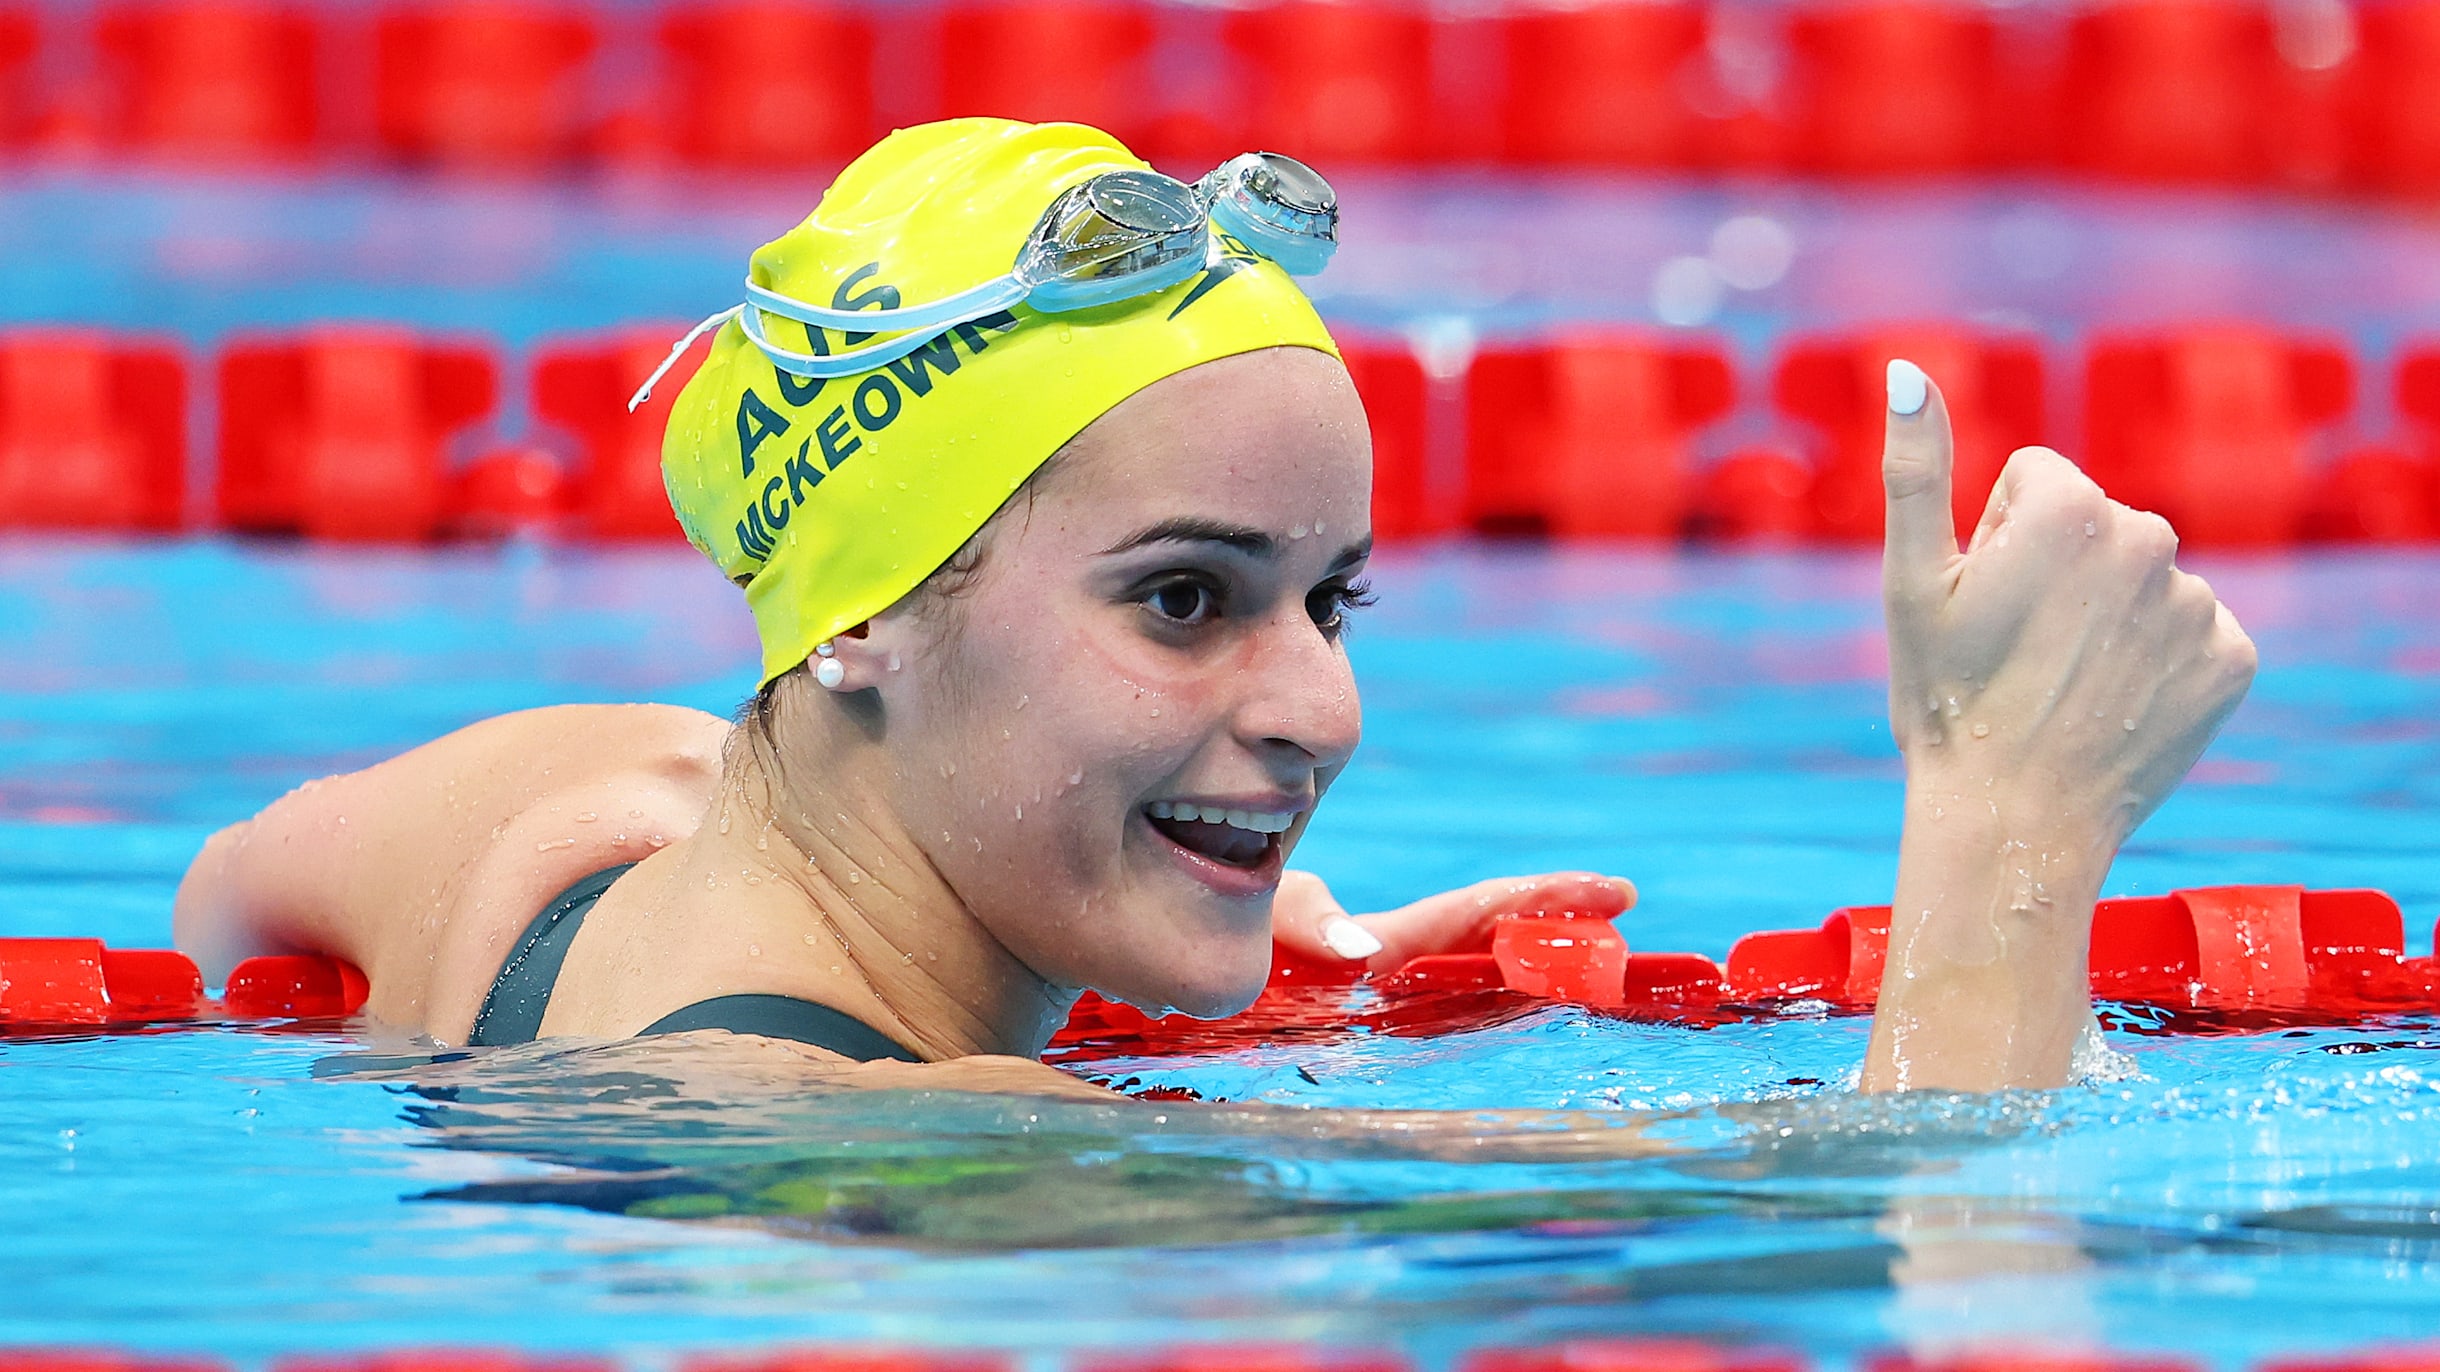 2022 Australian Swimming World Championship Trials Preview and schedule